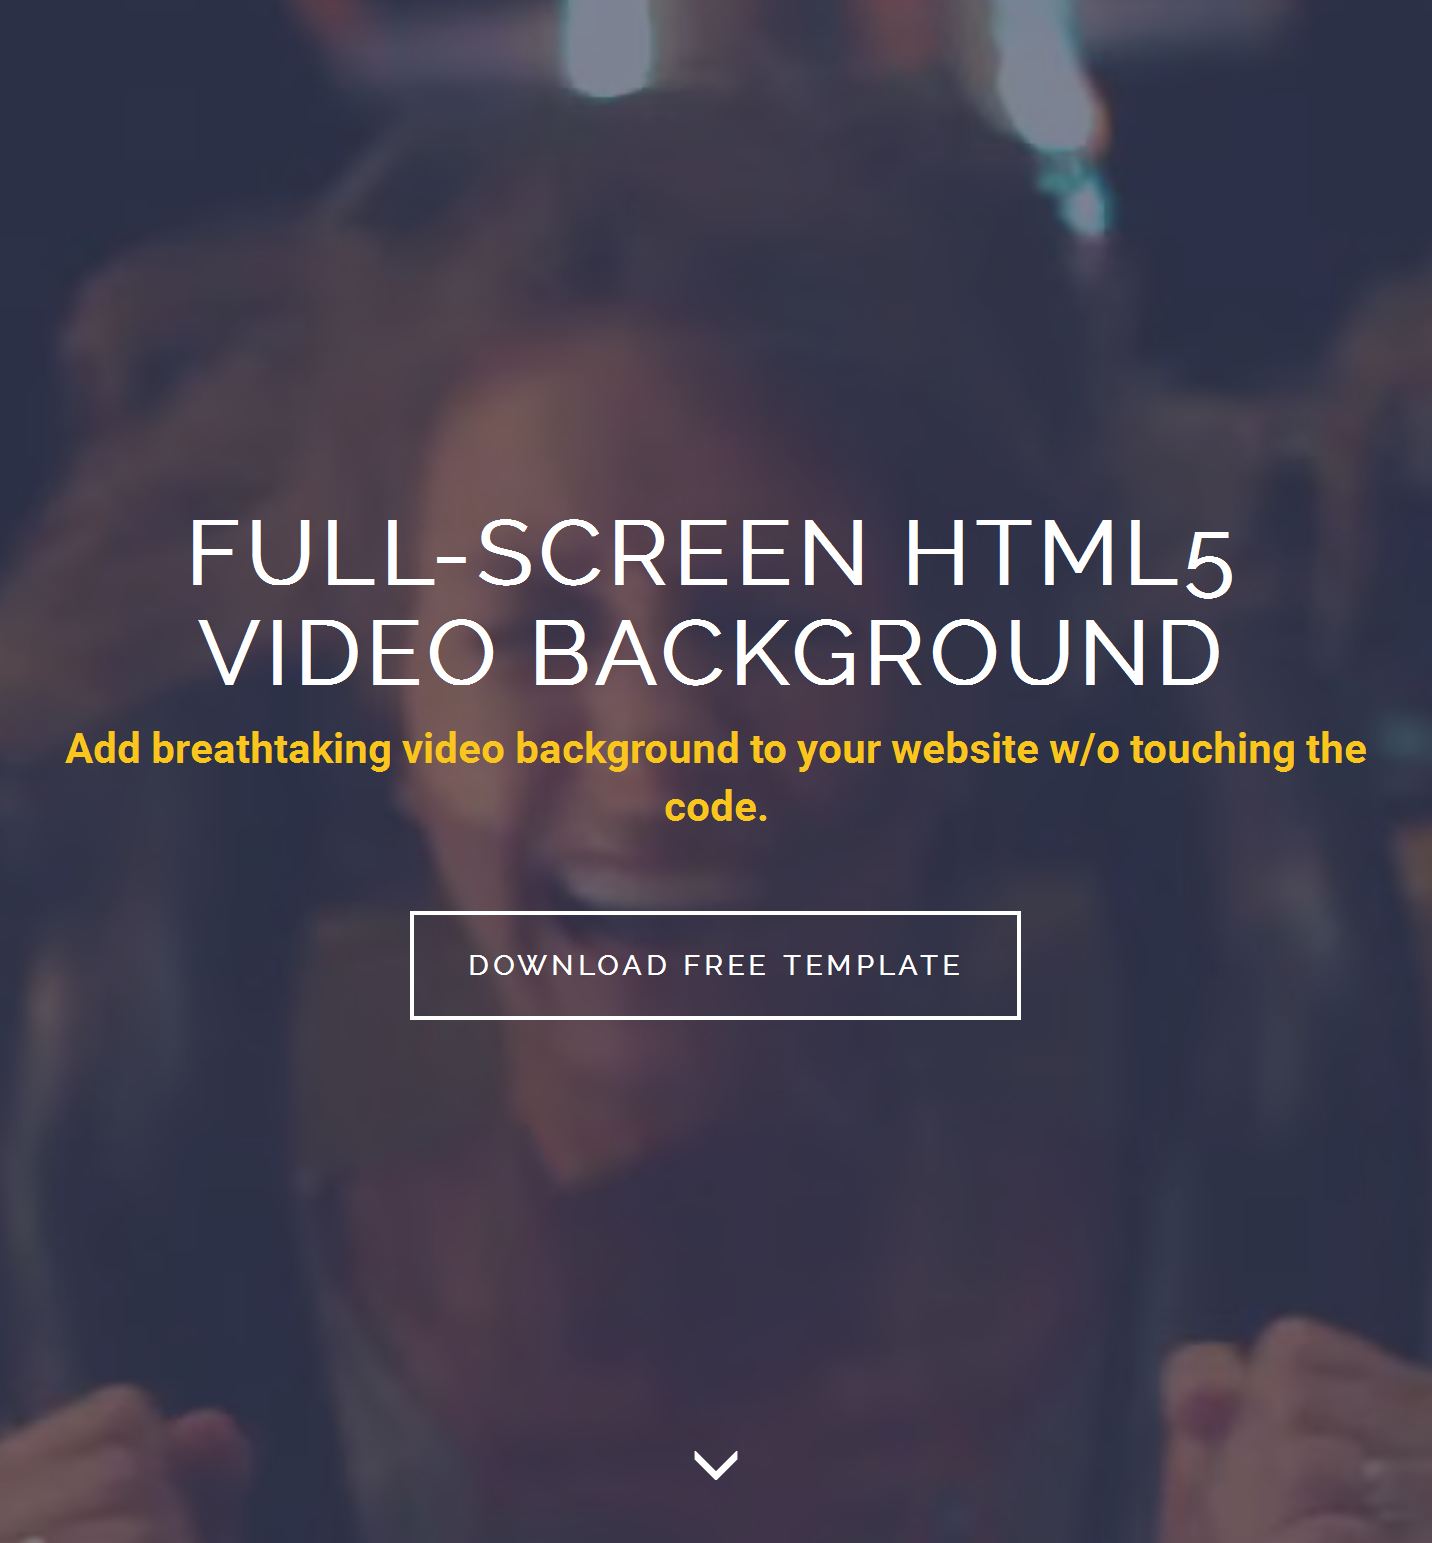 Best Free HTML5 Video Background Bootstrap Templates of 2019